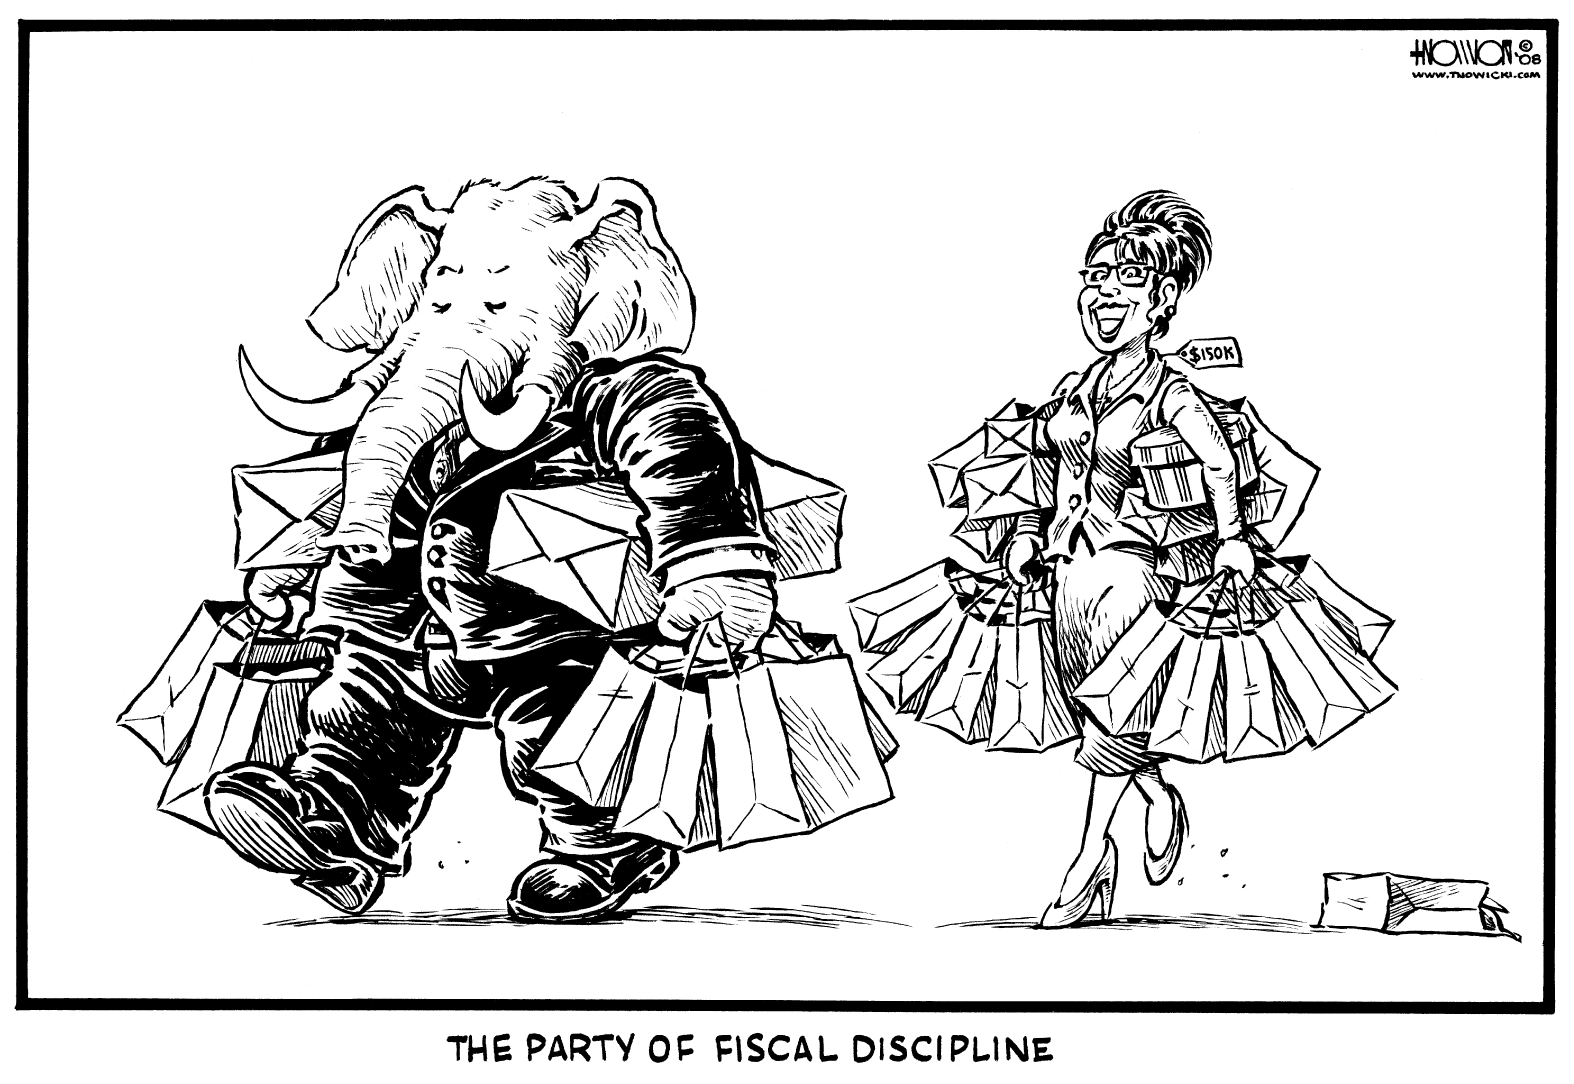 The Party of Fiscal Discipline